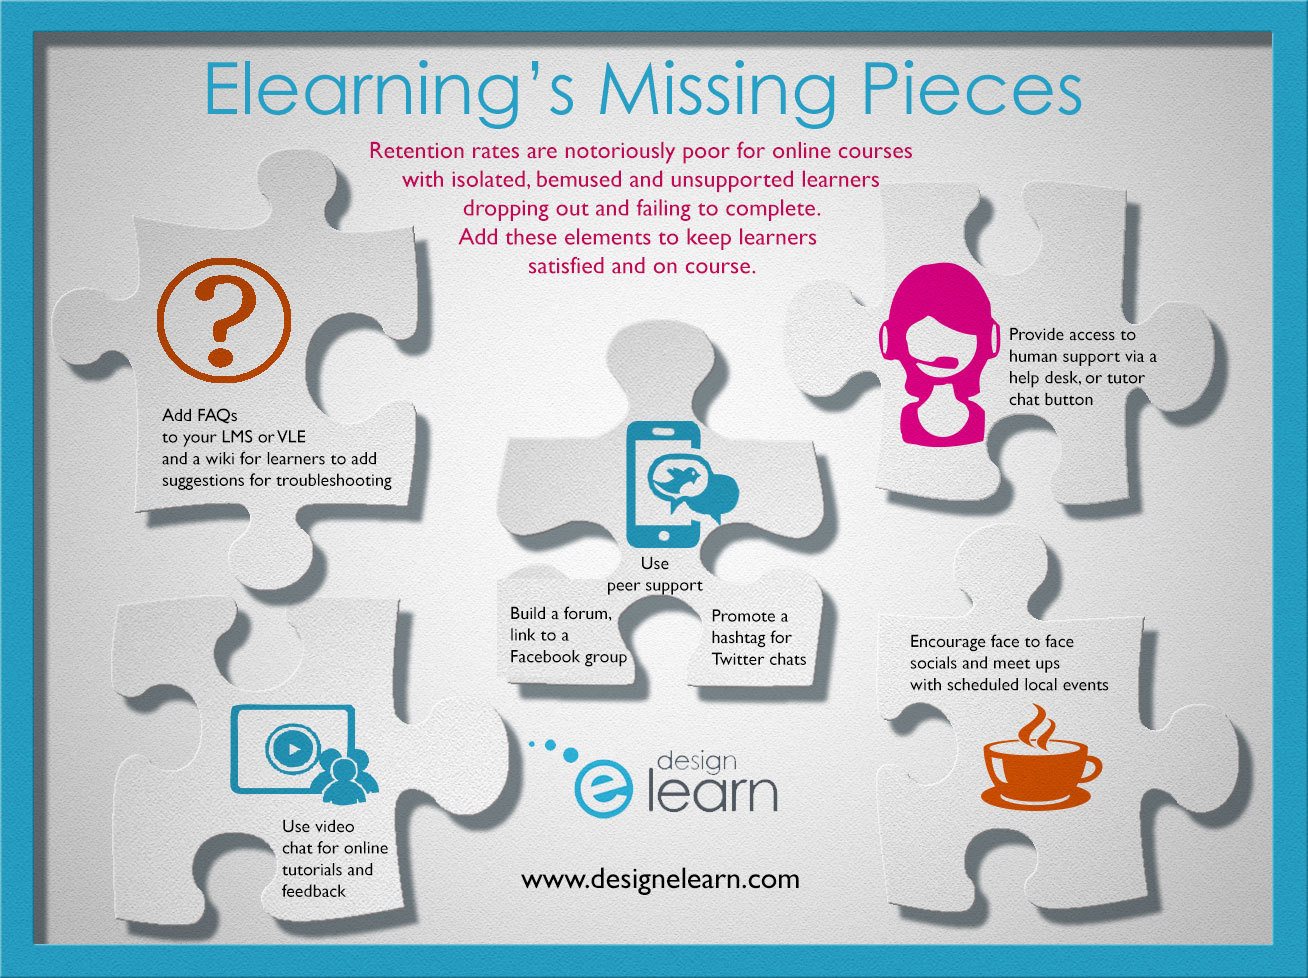 5 Tips To Improve Retention Rates For eLearning Courses Infographic